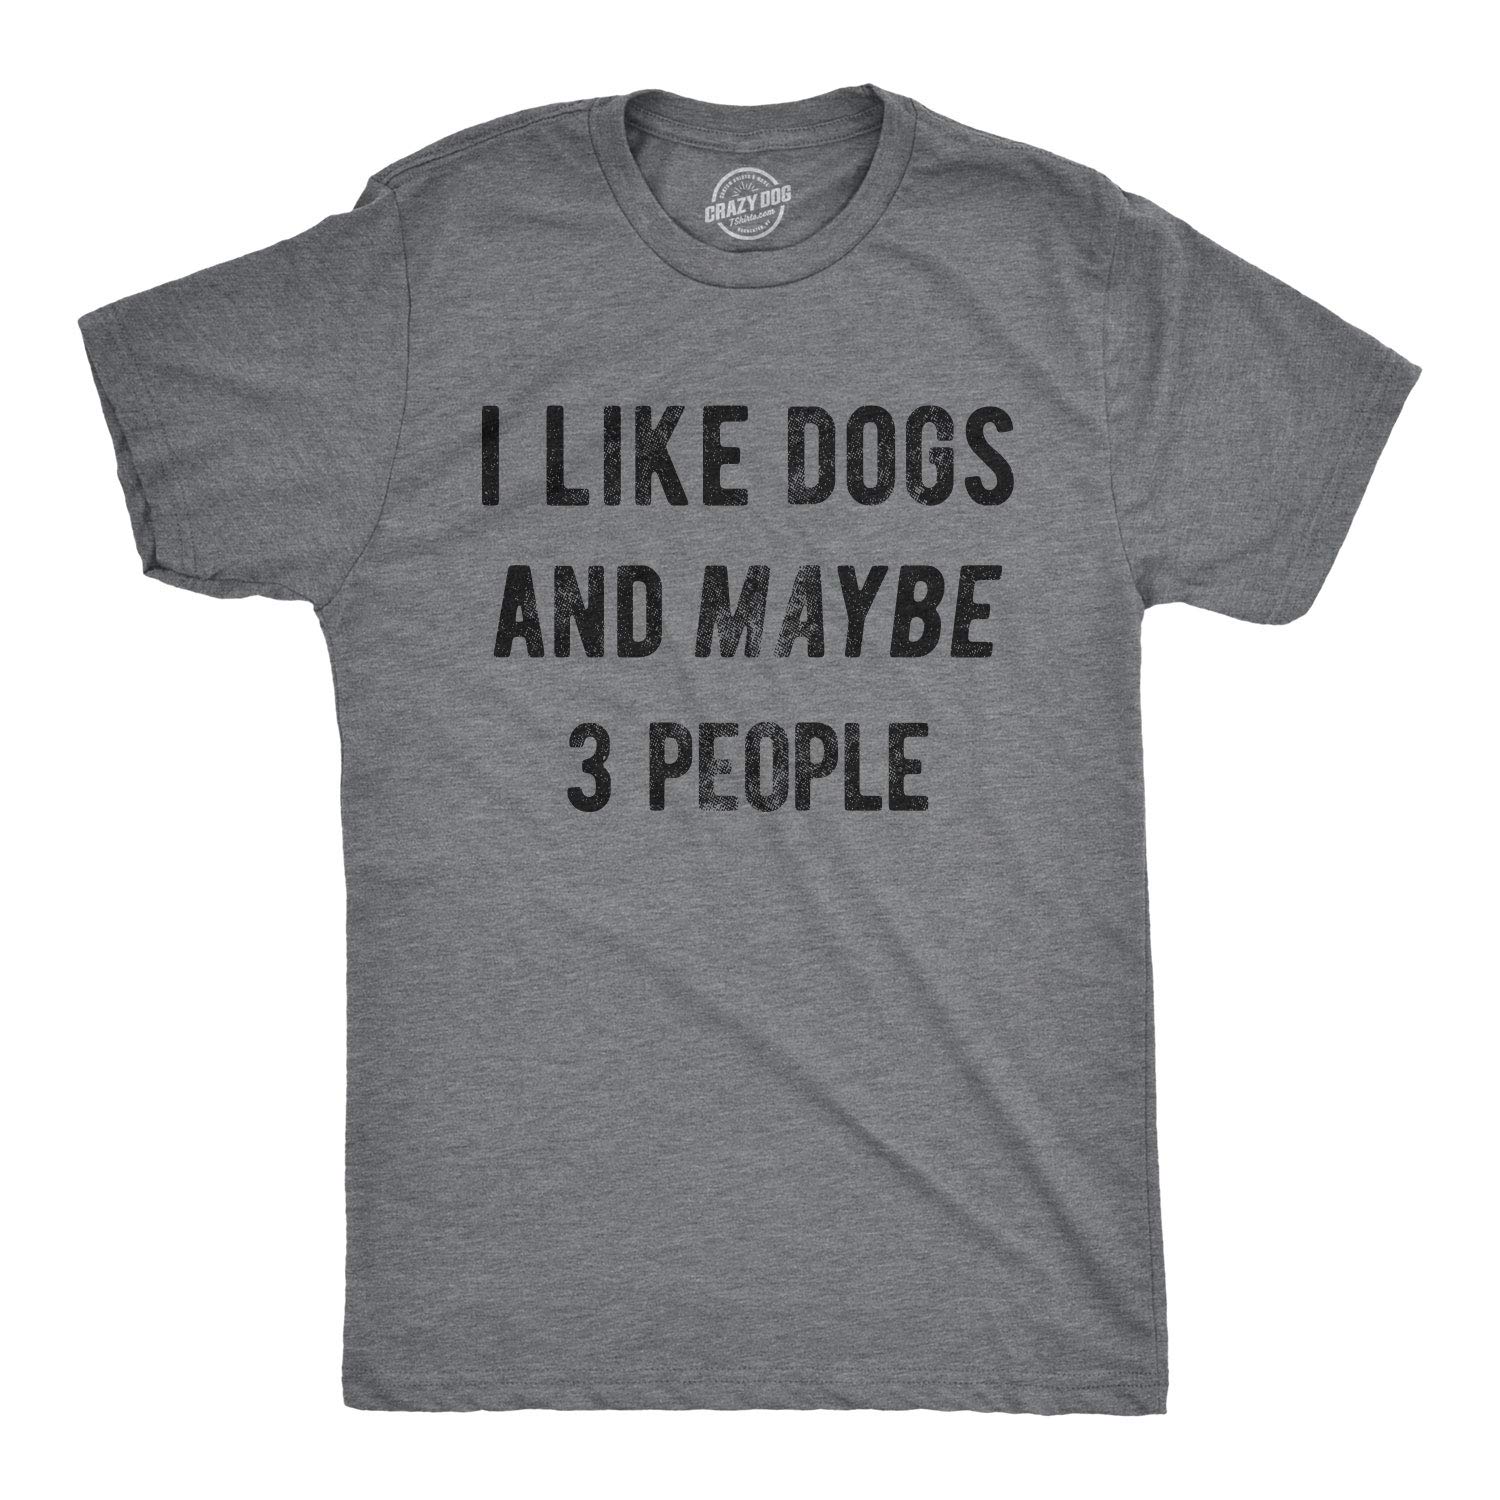 Mens I Like Dogs and Maybe 3 People T Shirt Funny Pet Lover Dad Cool Graphic Tee